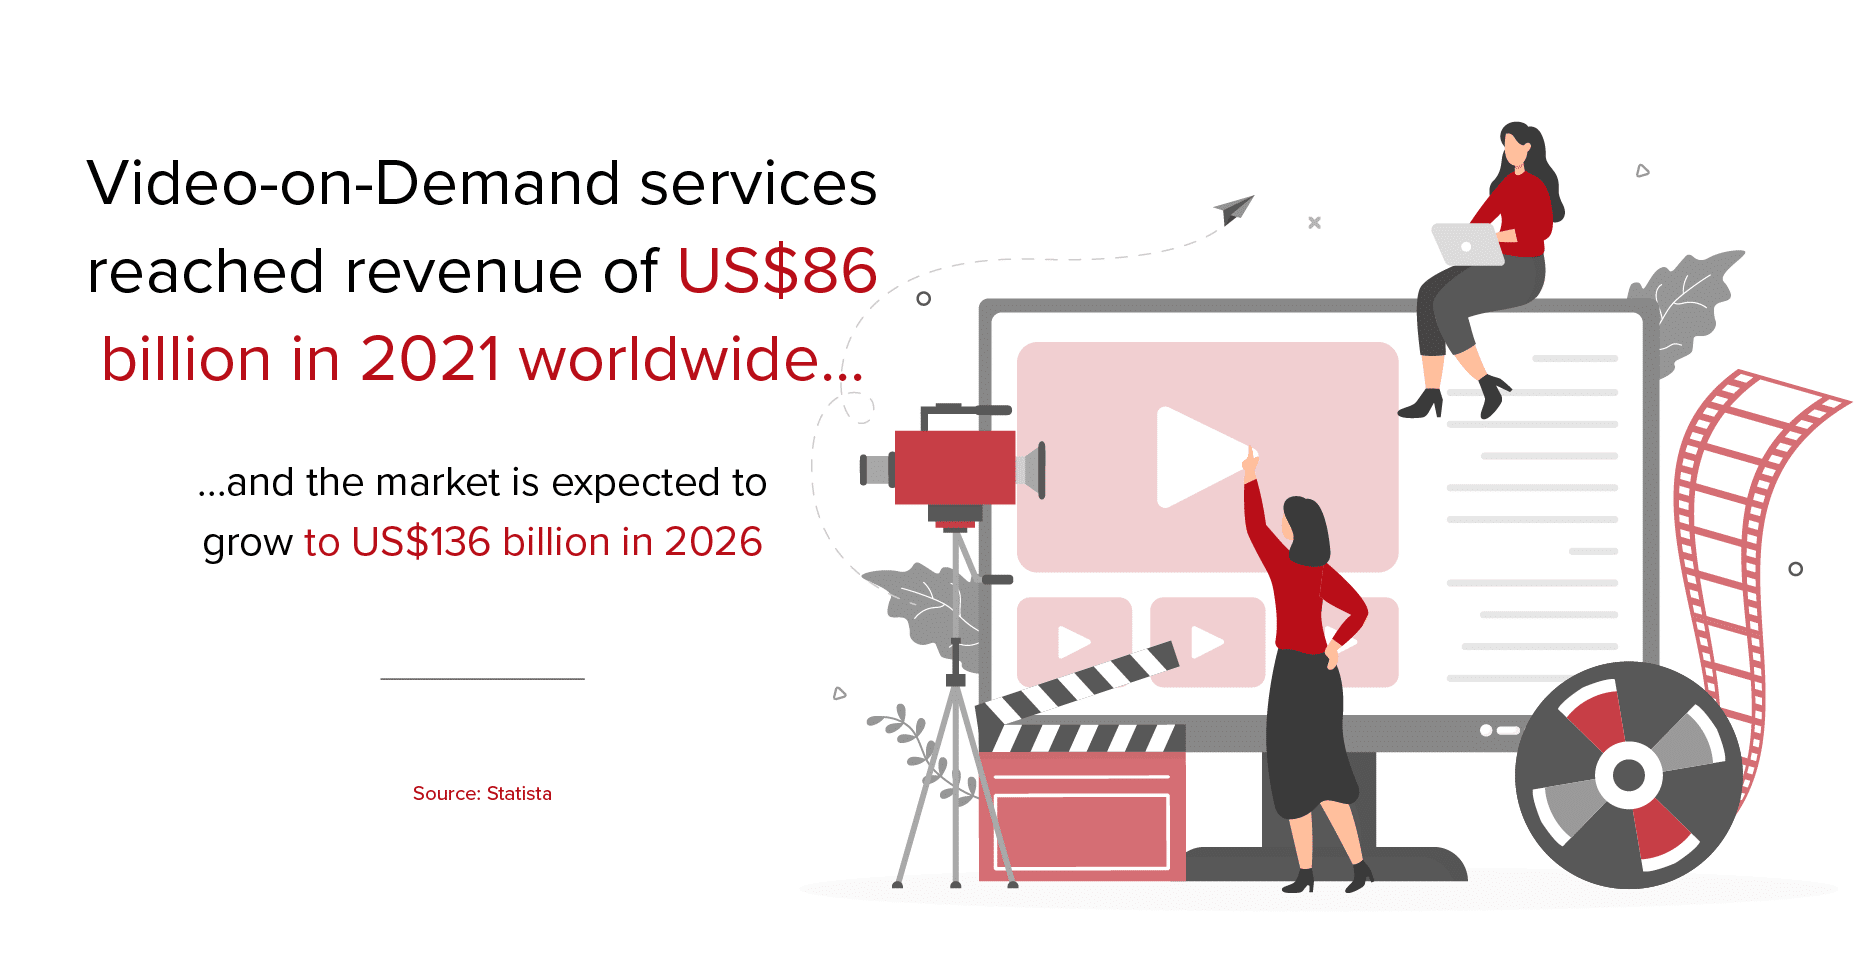 Video-on-demand services reached revenue of US$86 Billion in 2021 worldwide